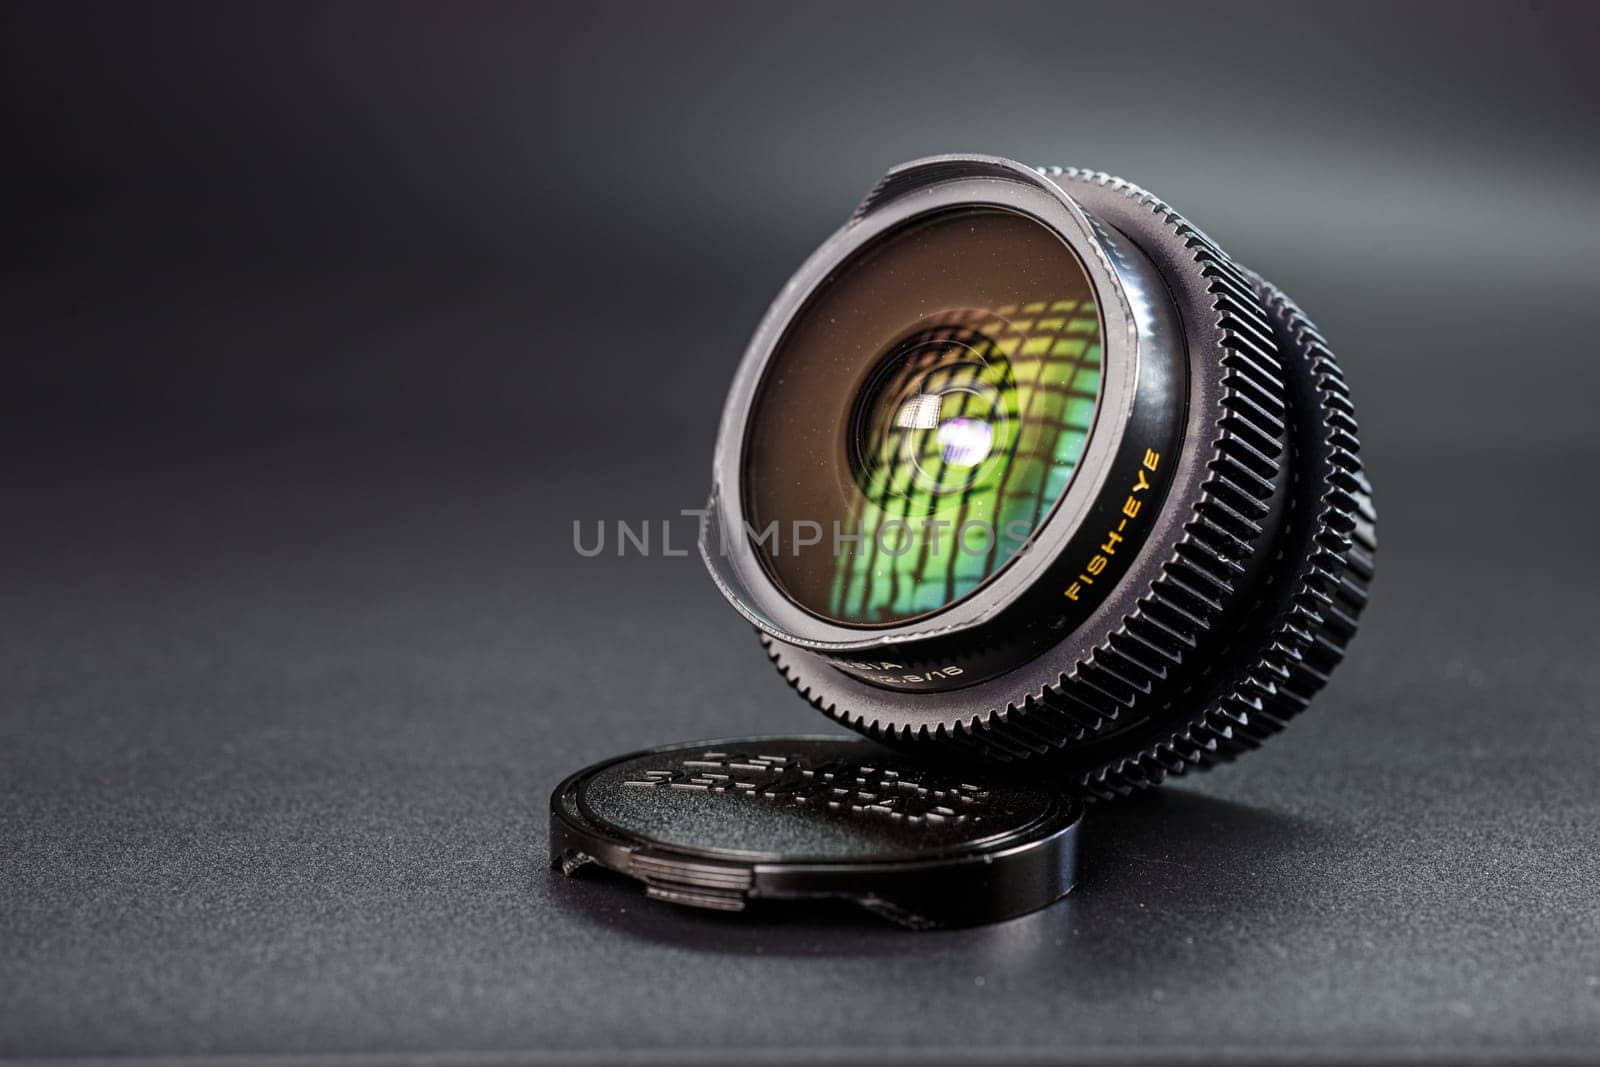 Fisheye camera lens with vivid reflections, set on lens cap, professional photography equipment, clear focus on the text and intricate lens design. by mosfet_ua